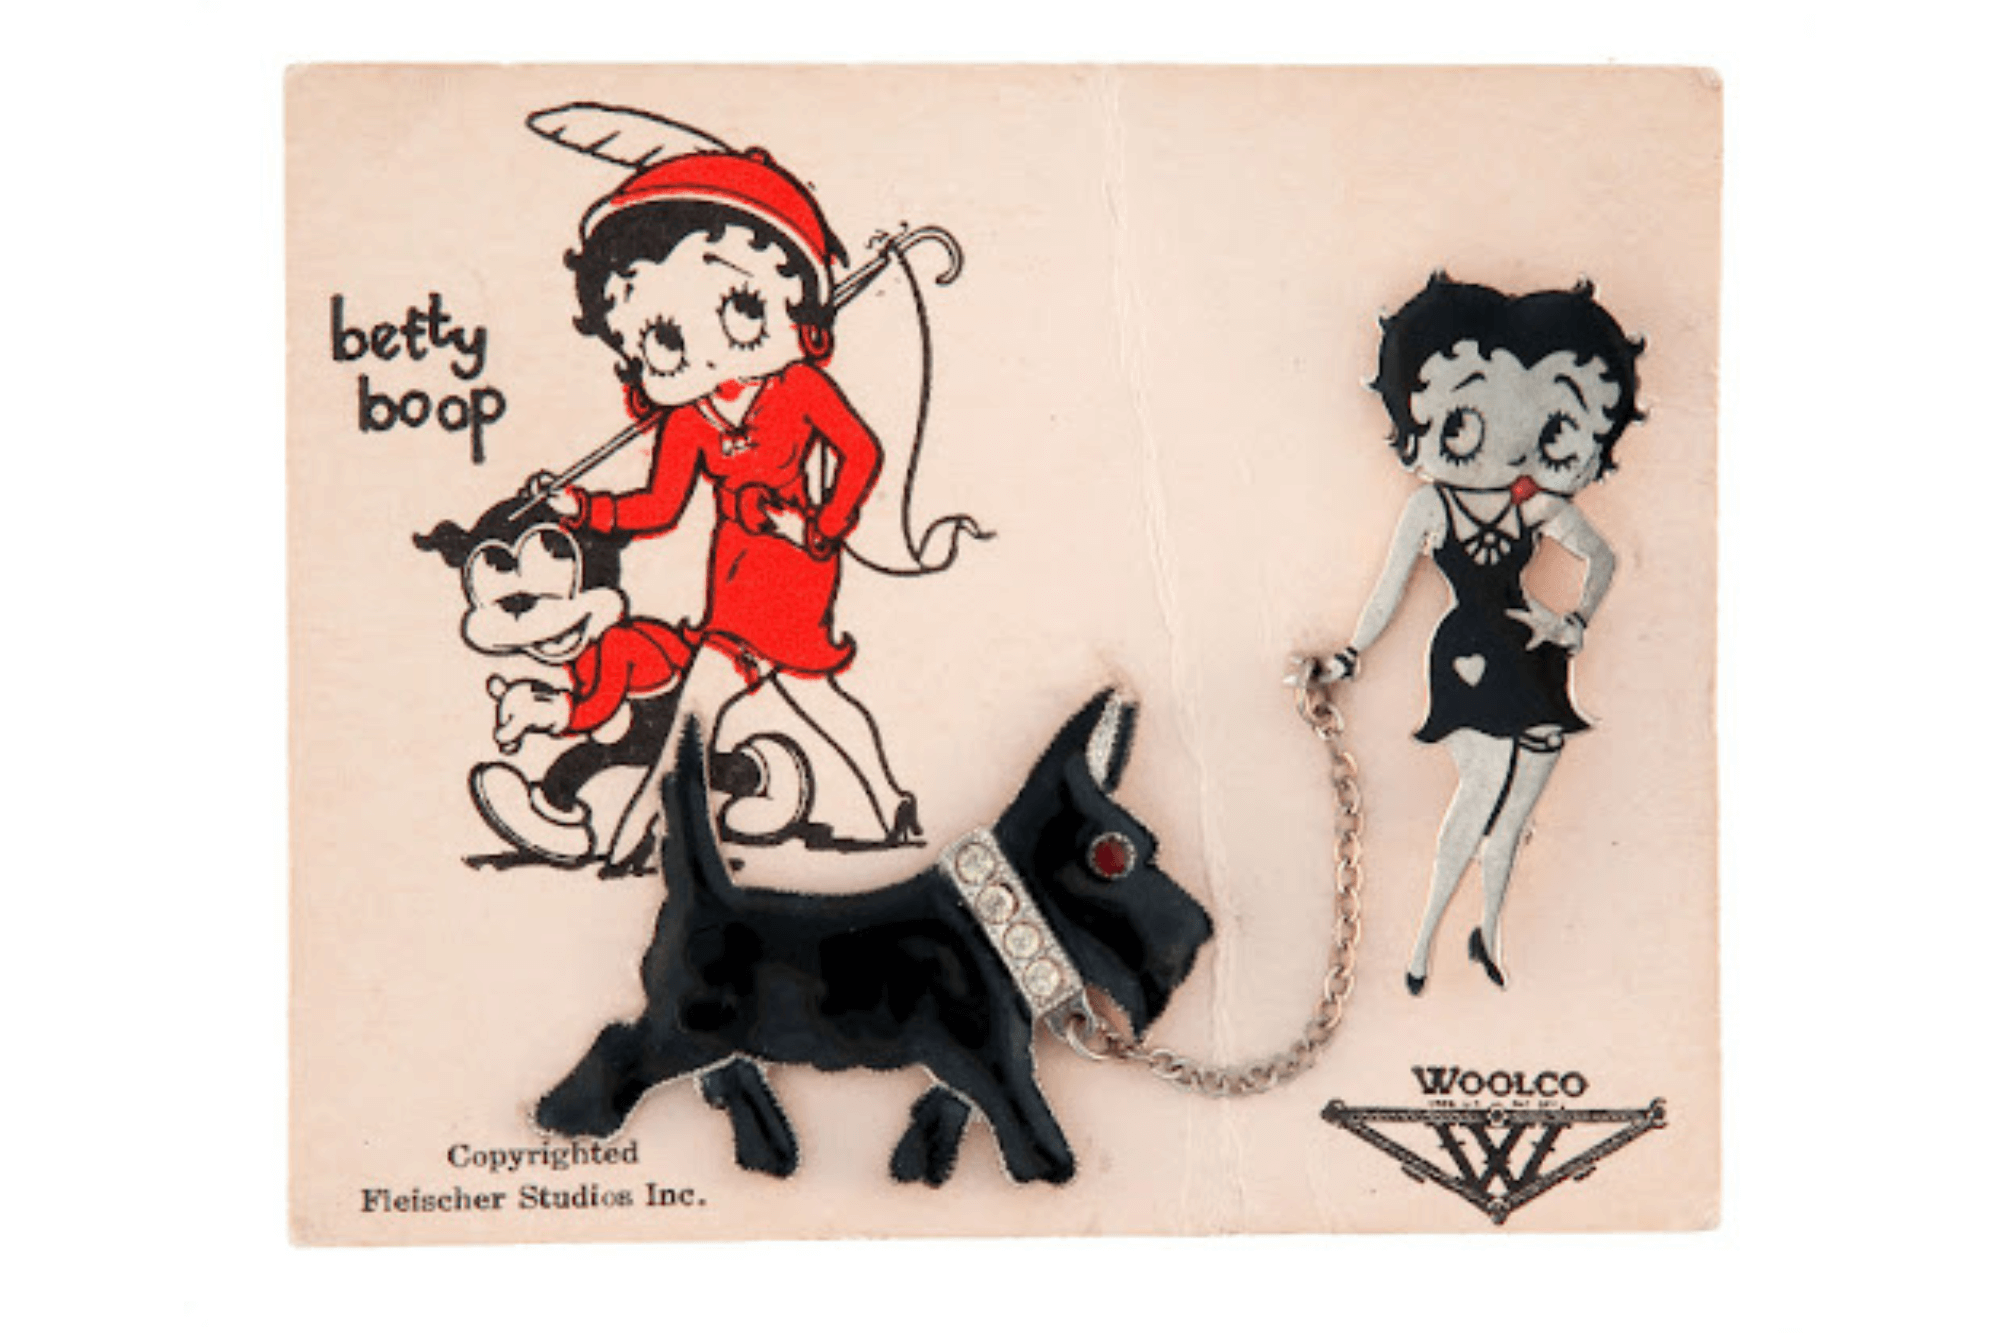 Black chain Betty Boop necklace pop culture Hollywood classic cartoon retro